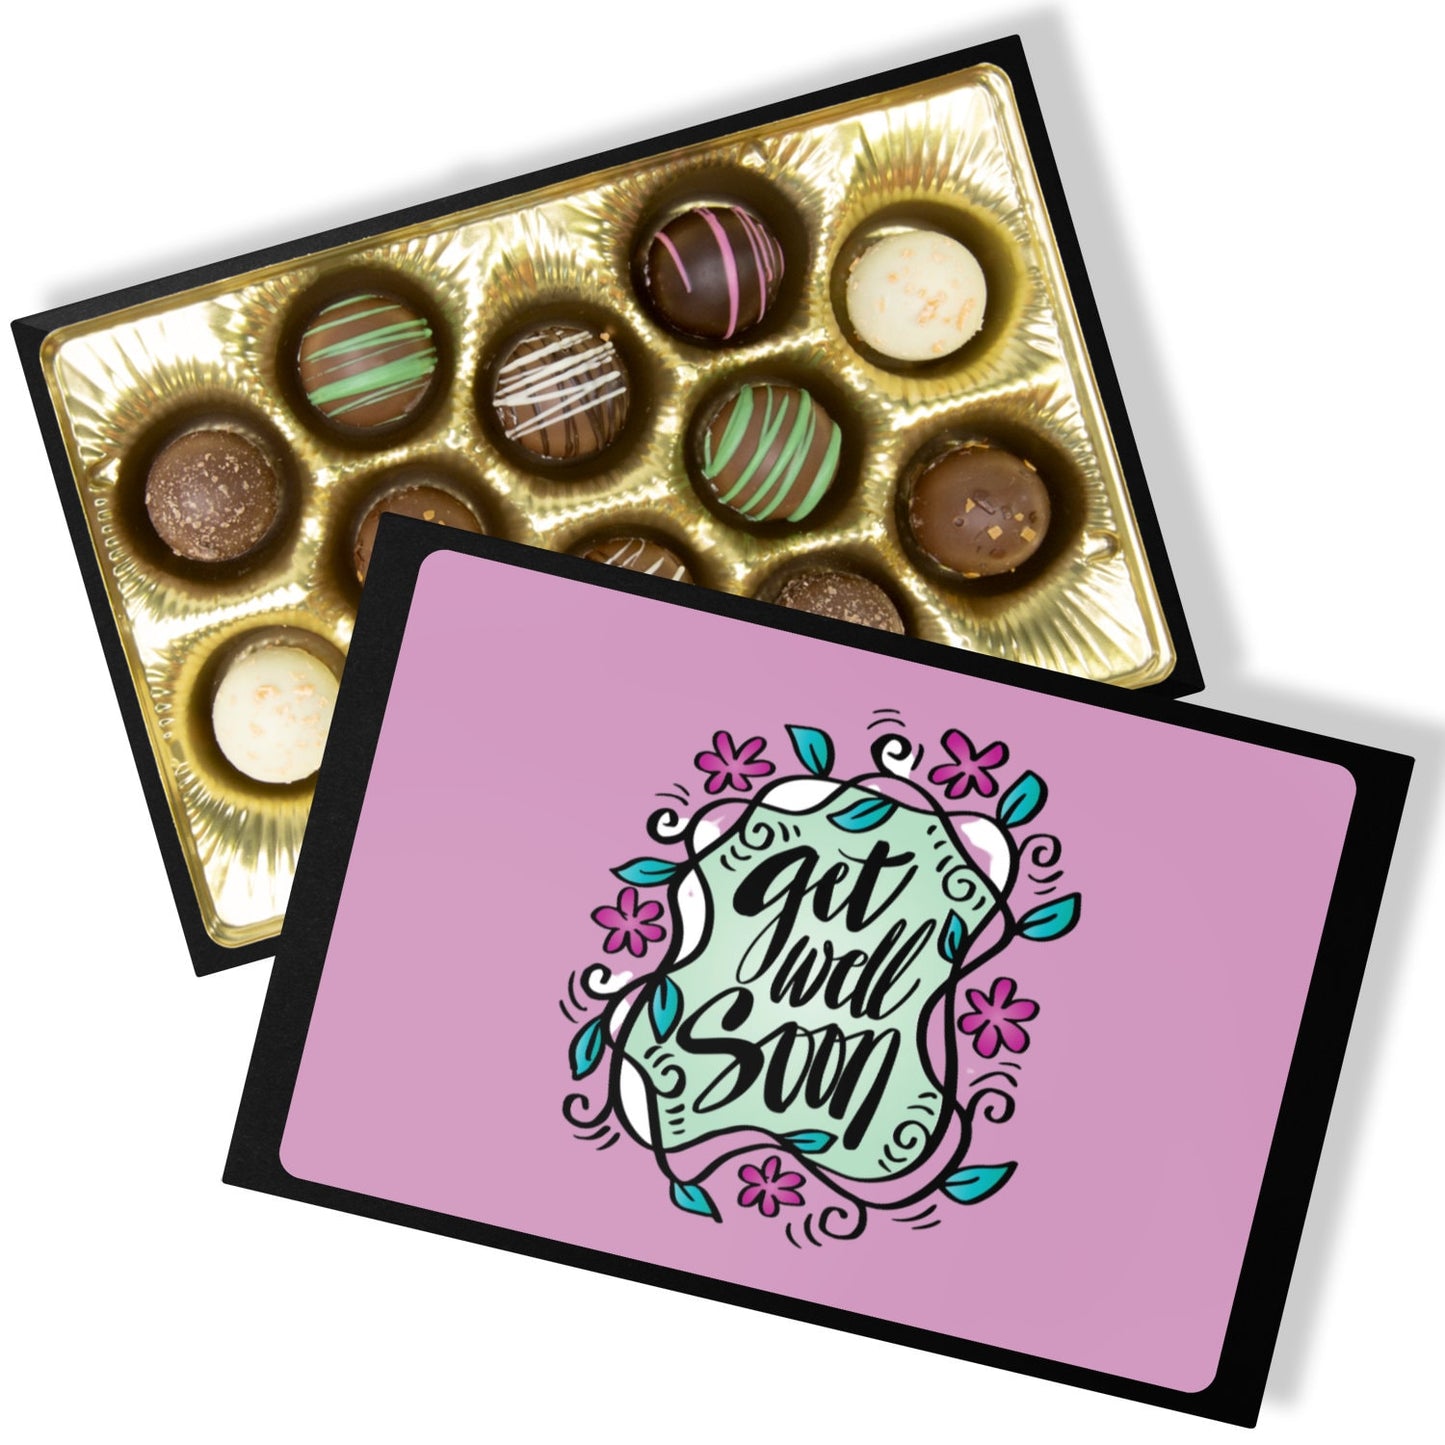 Get Well Soon Gift Box of 12 Chocolate Truffles, Cancer Support Gifts, Send A Gift, Get Well Gift, Care Package for Her